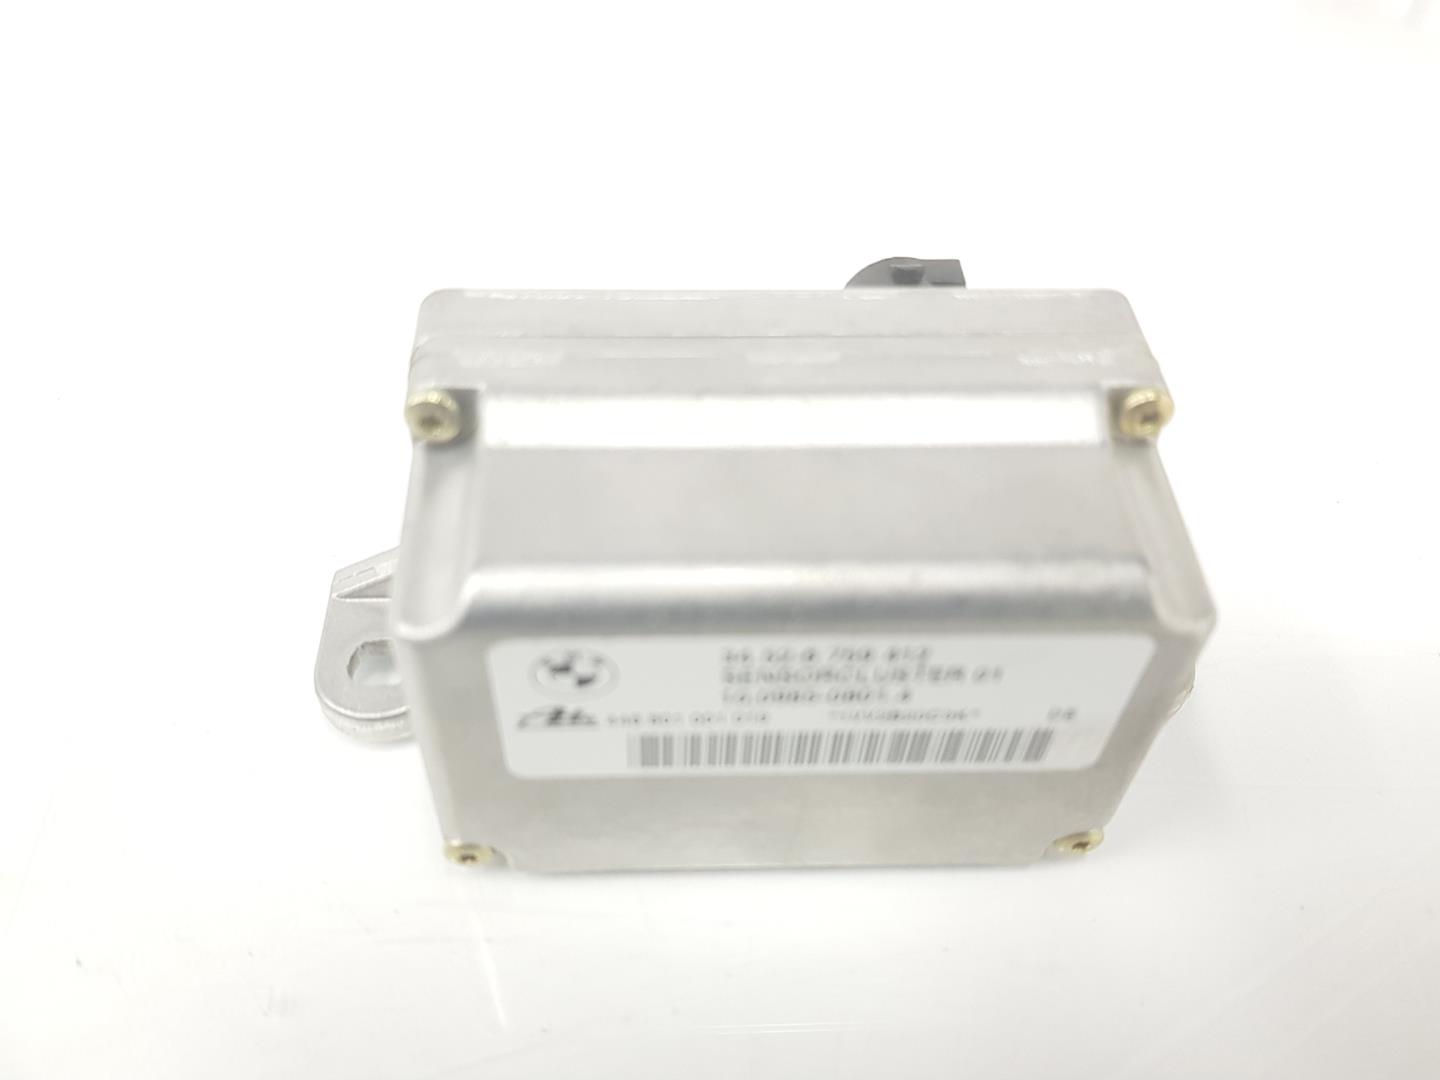 BMW 3 Series E46 (1997-2006) Other Control Units 34526759412, 34526759412 19910164